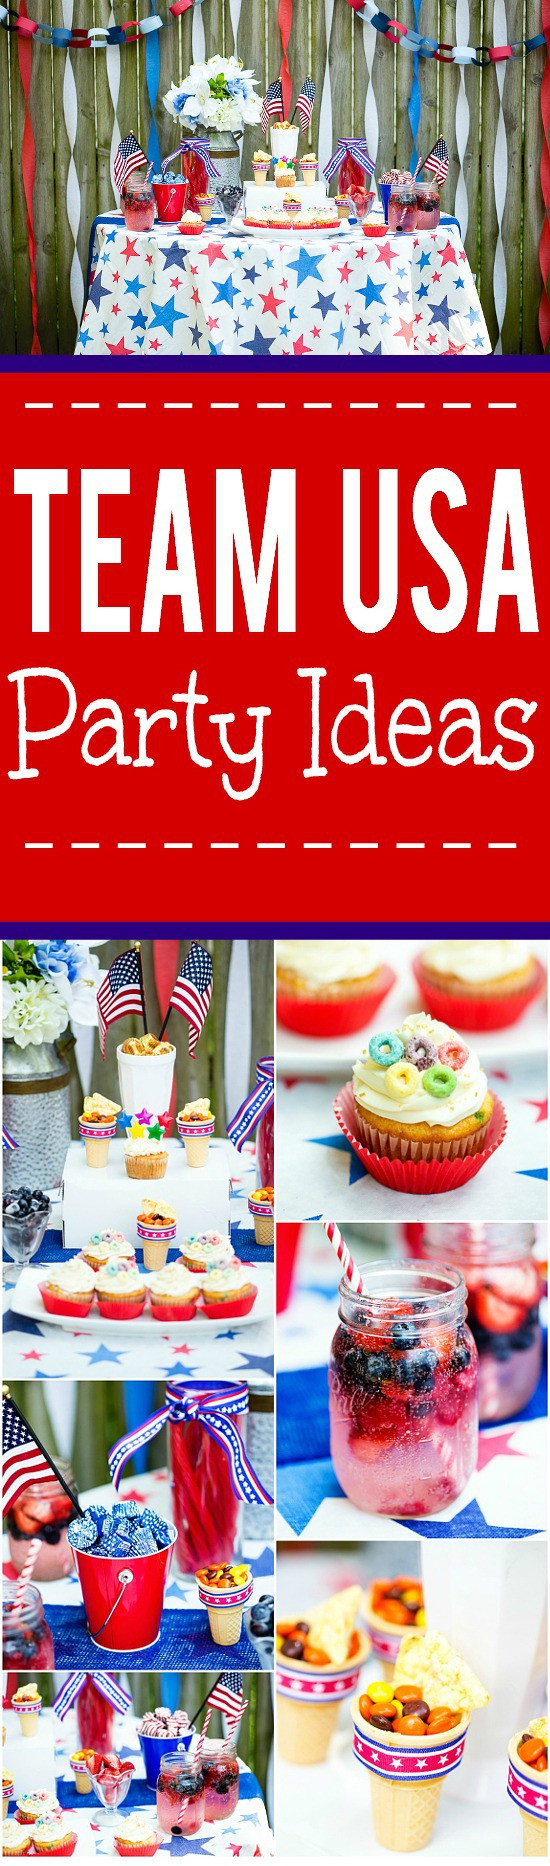 Team Holiday Party Ideas
 Team USA Summer Sports Party Ideas